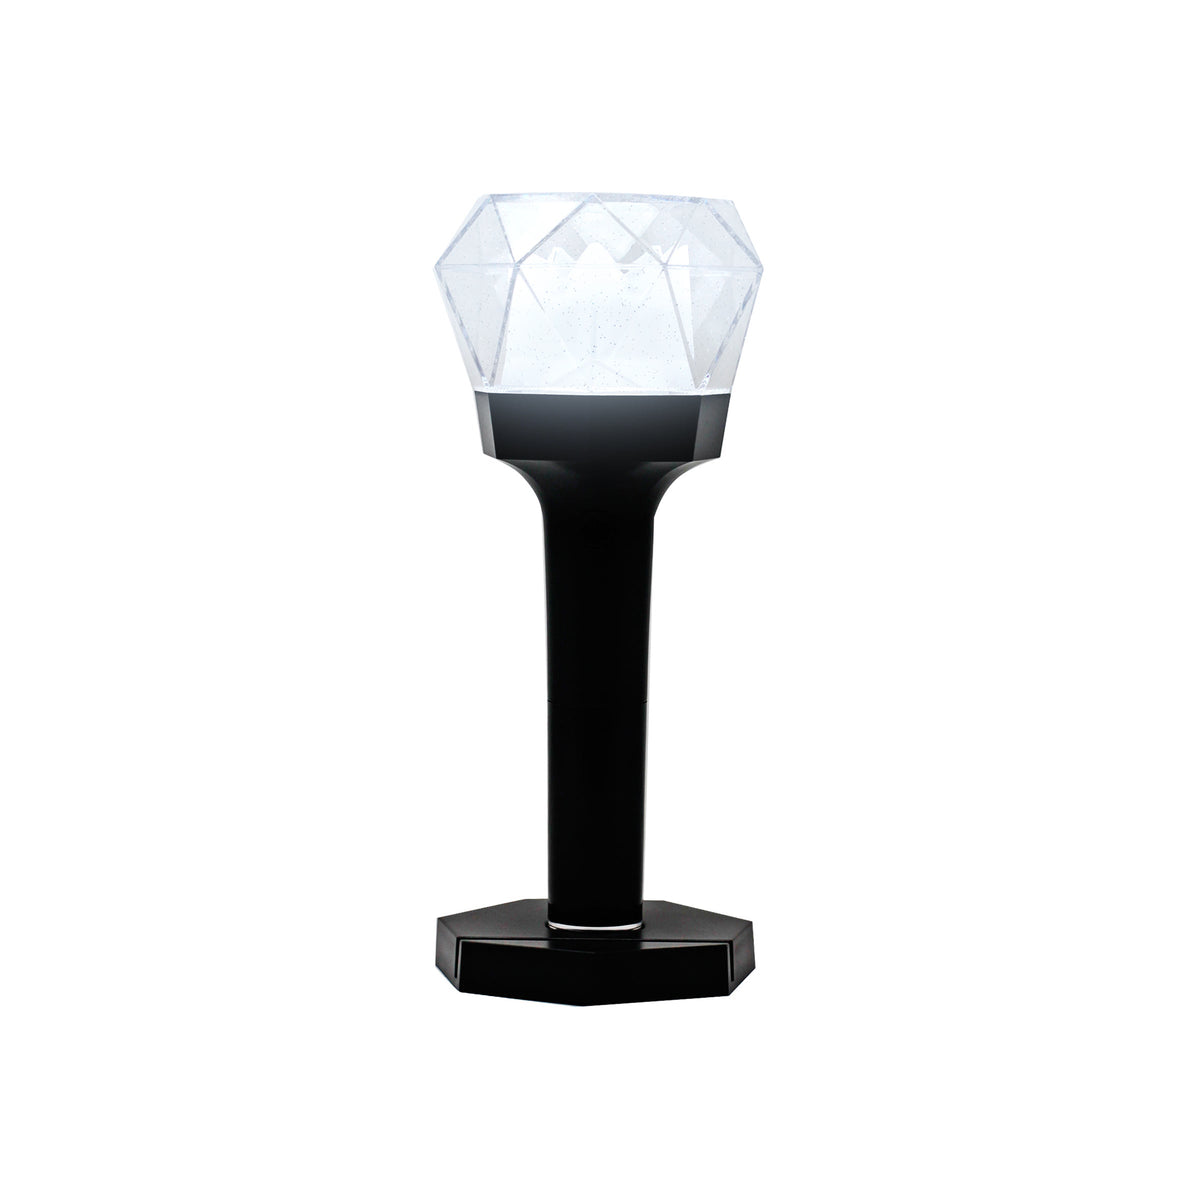 Monsta X Official Lightstick Version 2 main product image 4